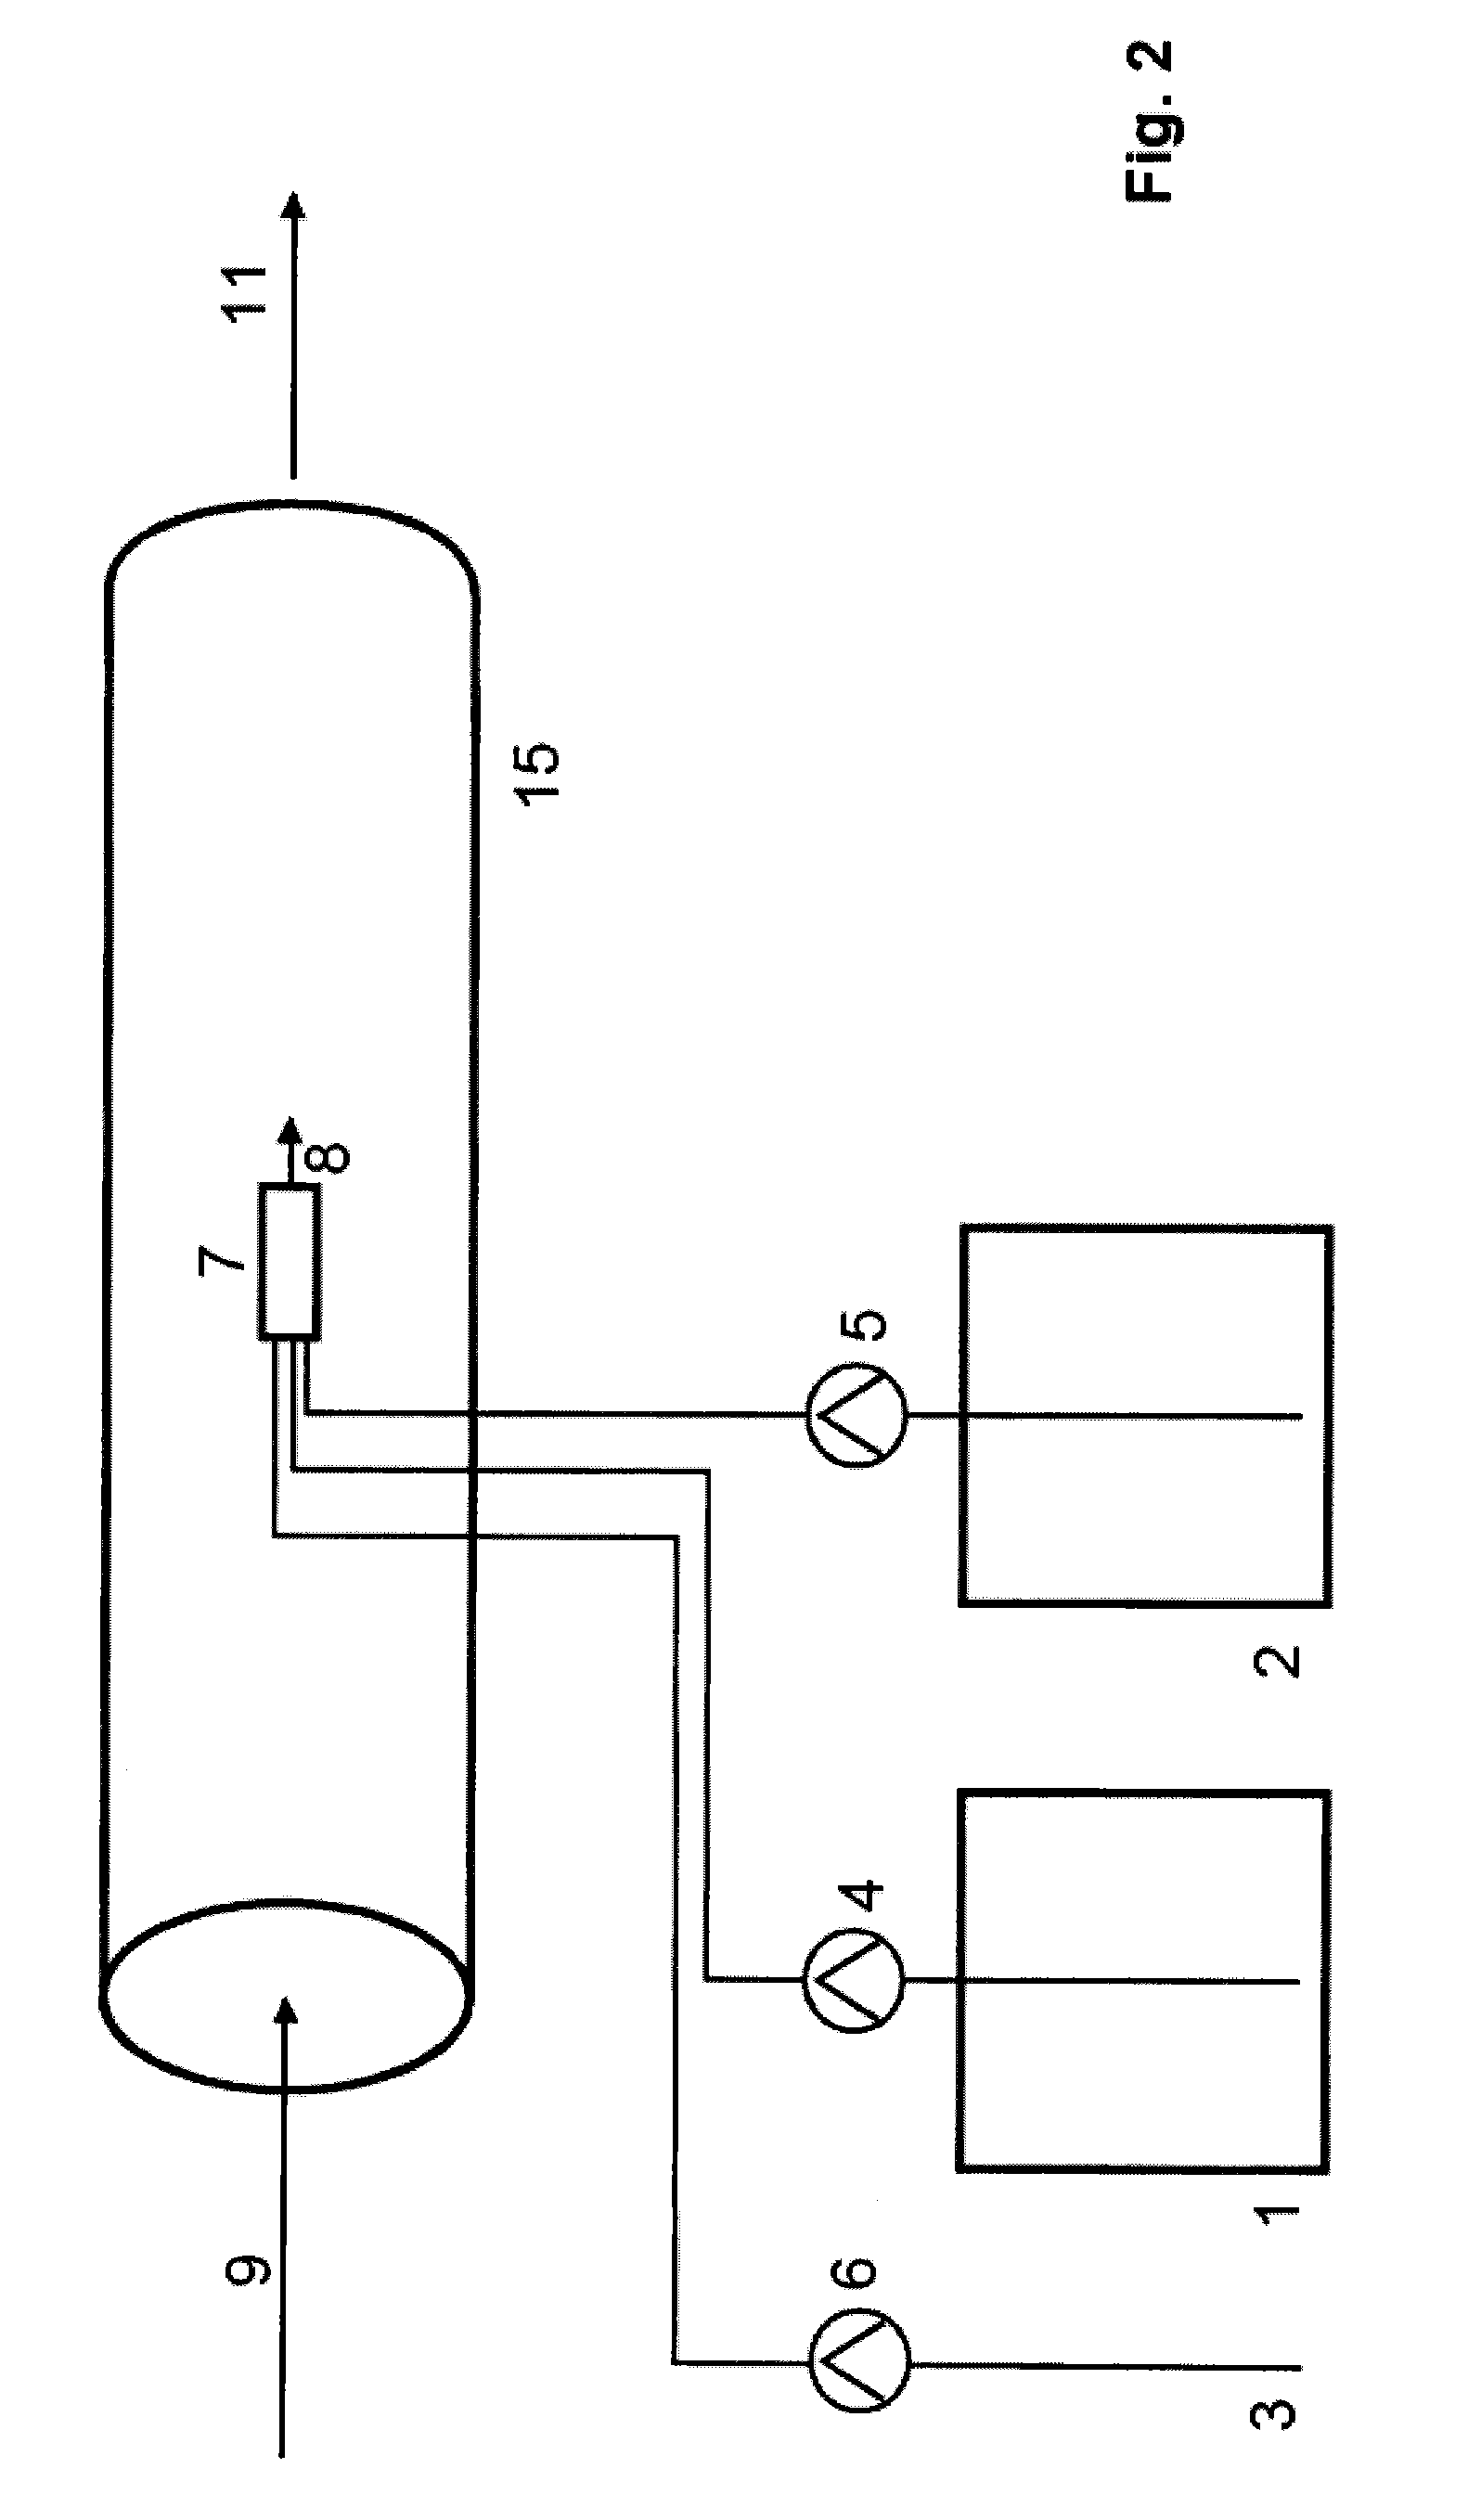 Method of treating water with chlorine dioxide